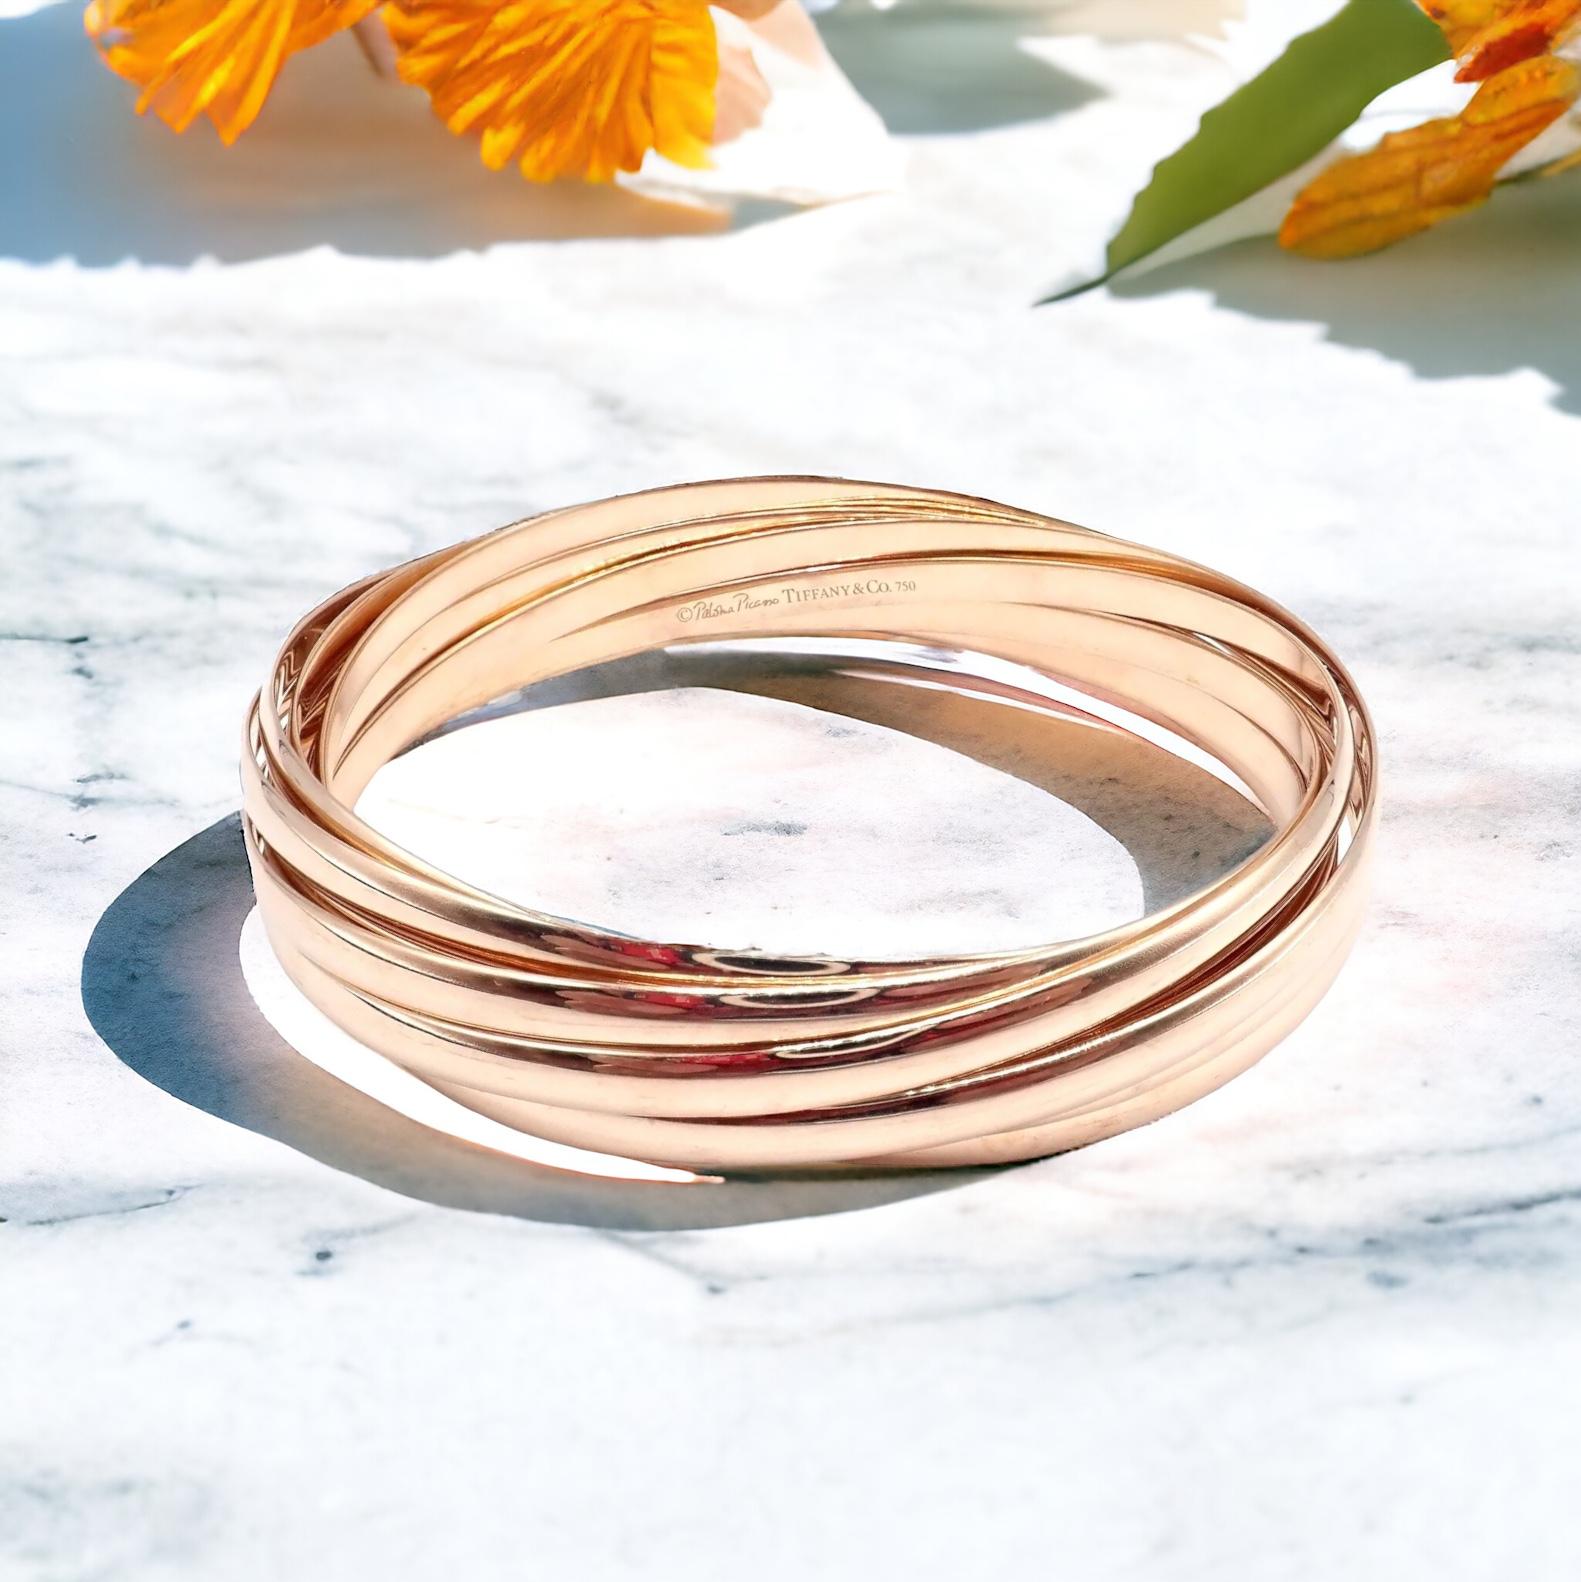 18k Yellow Gold 9 Row Paloma Picasso Melody Calife Bracelet by Tiffany & Co.

Indulge in the splendor of this Authentic Tiffany & Co 18k Rose Gold 9 Row Melody Calife Picasso Bracelet. 

This exquisite piece, a creation of Picasso’s romantic period,